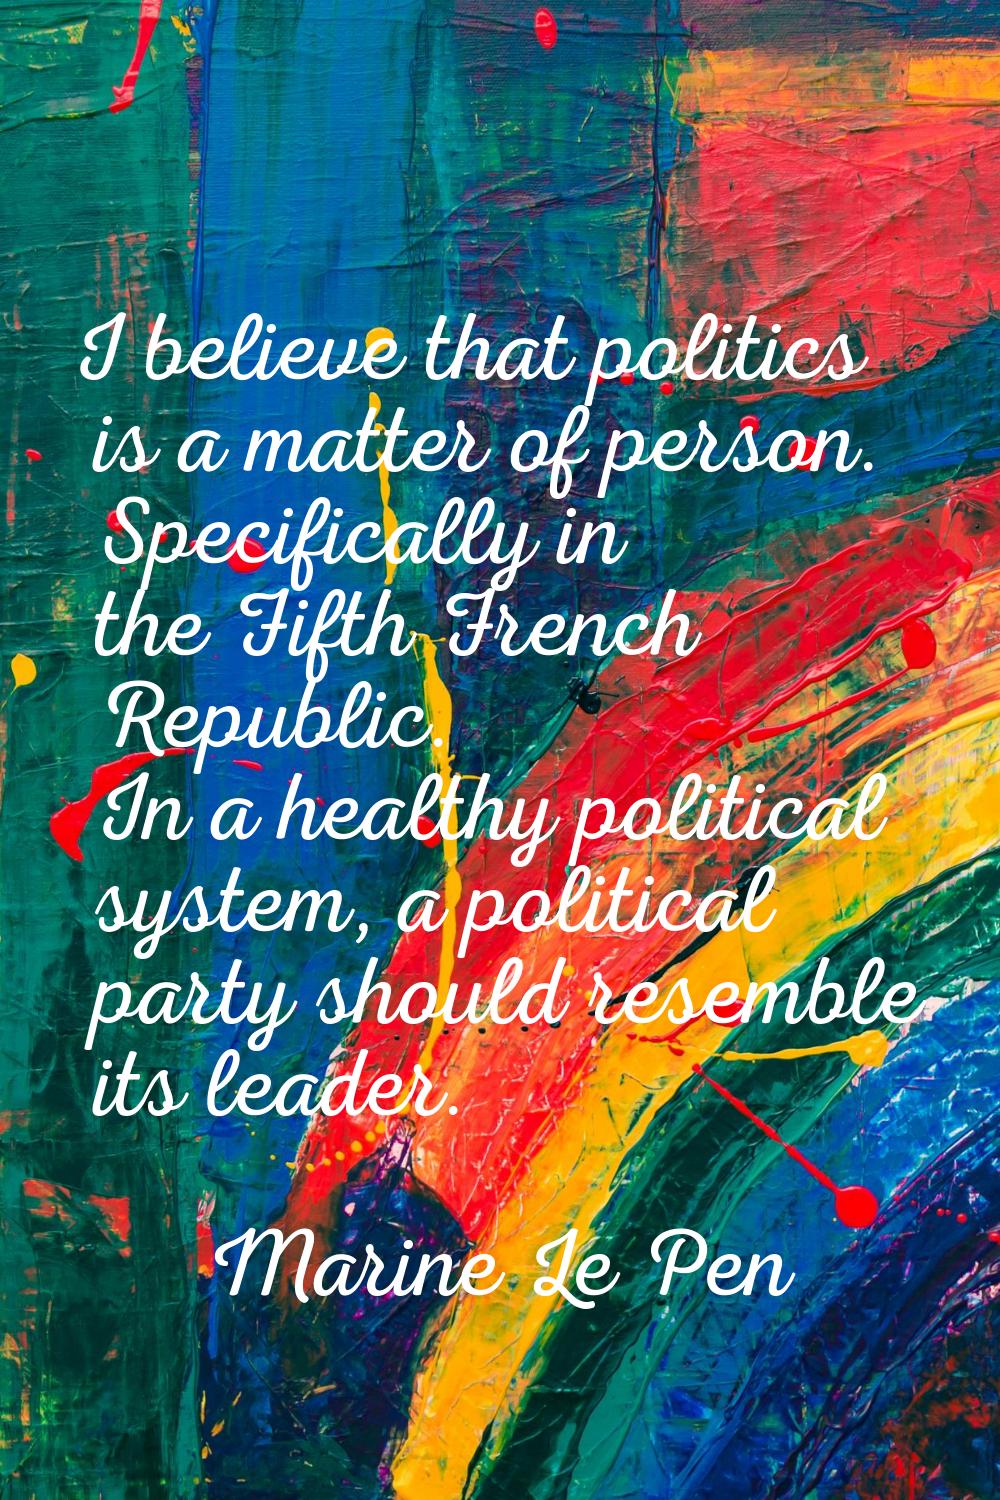 I believe that politics is a matter of person. Specifically in the Fifth French Republic. In a heal